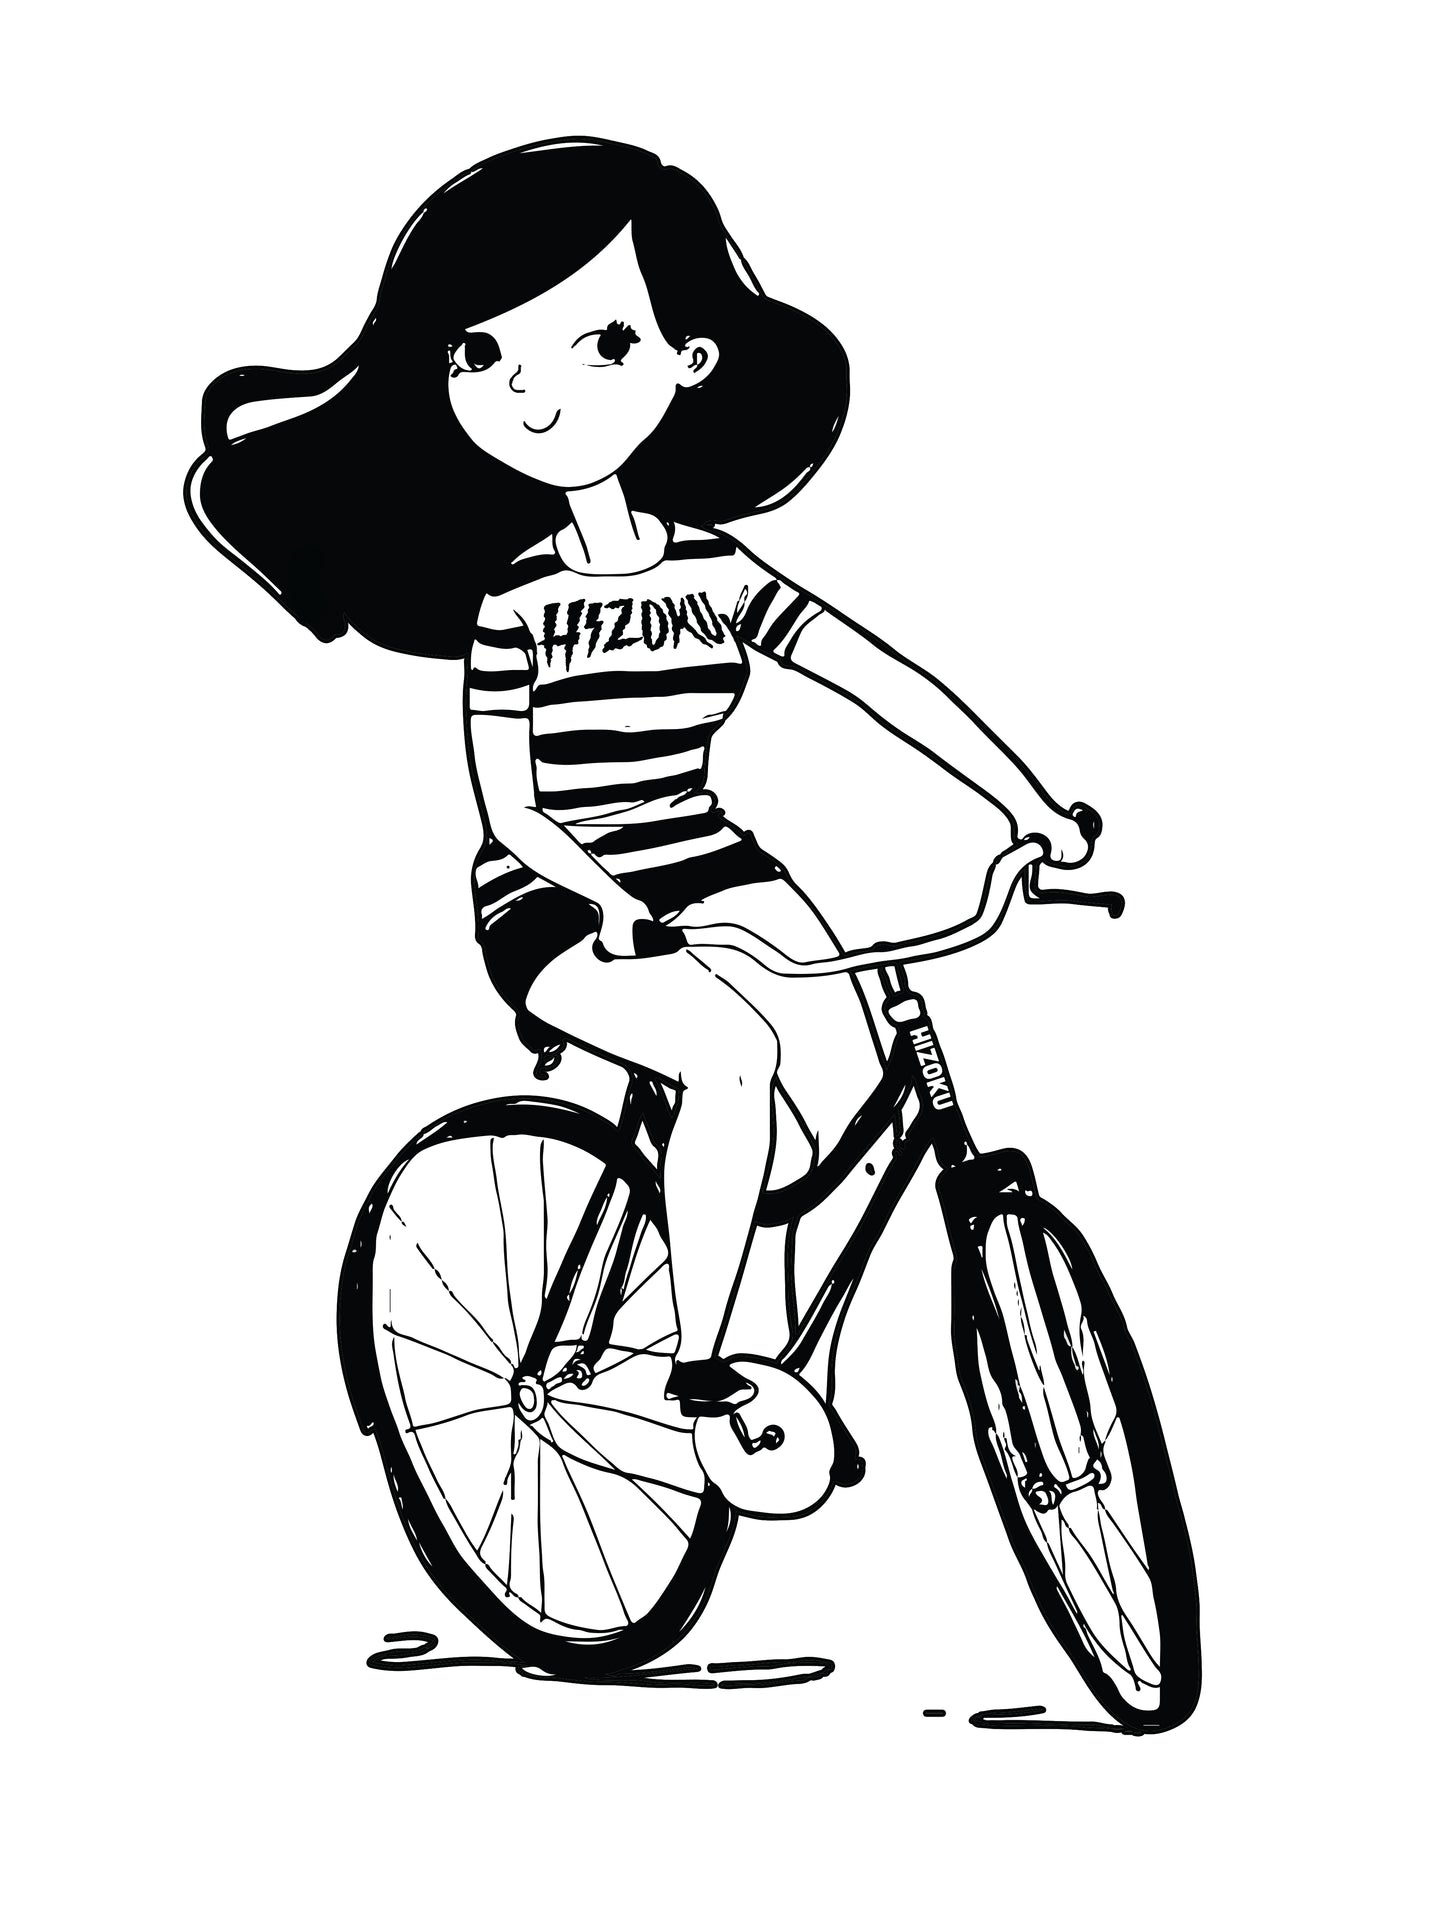 Limited Edition Bike Girl 13 x 19 Poster Print